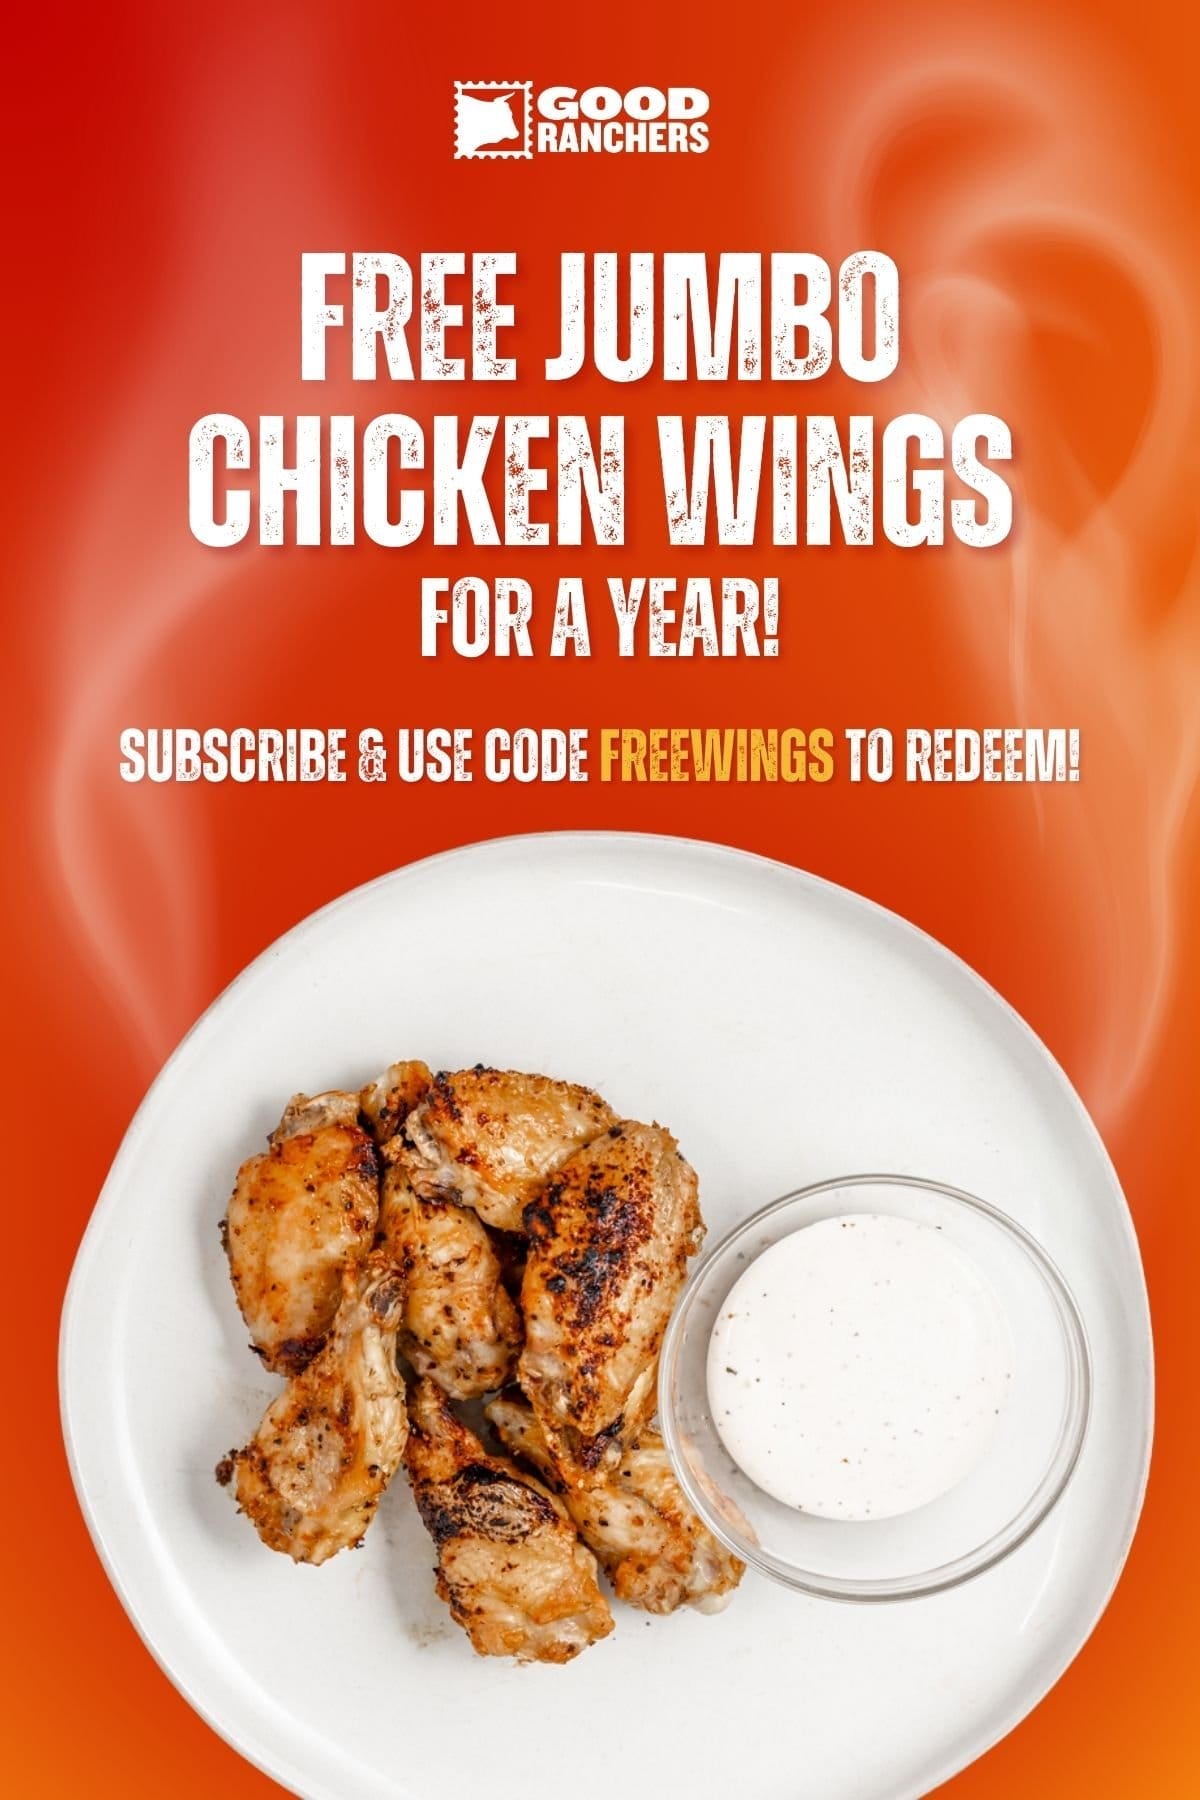 Get 4 lbs of Good Ranchers chicken wings for FREE